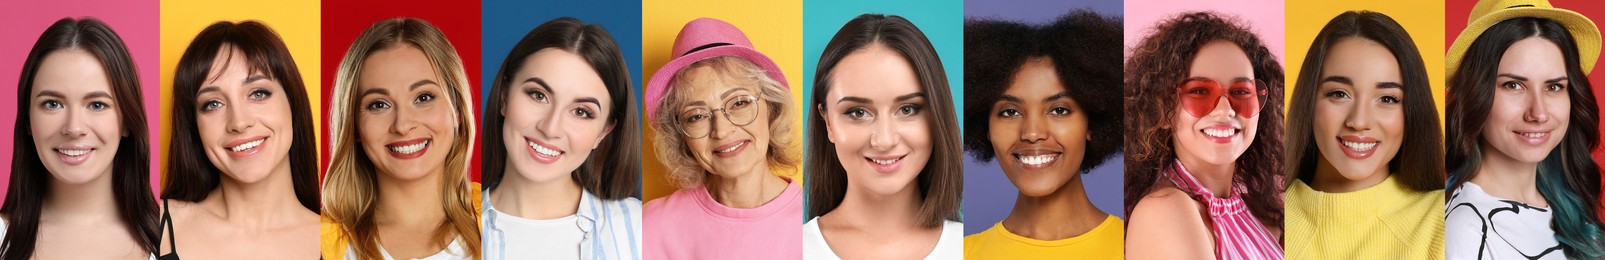 Set with portraits of happy women on different color backgrounds